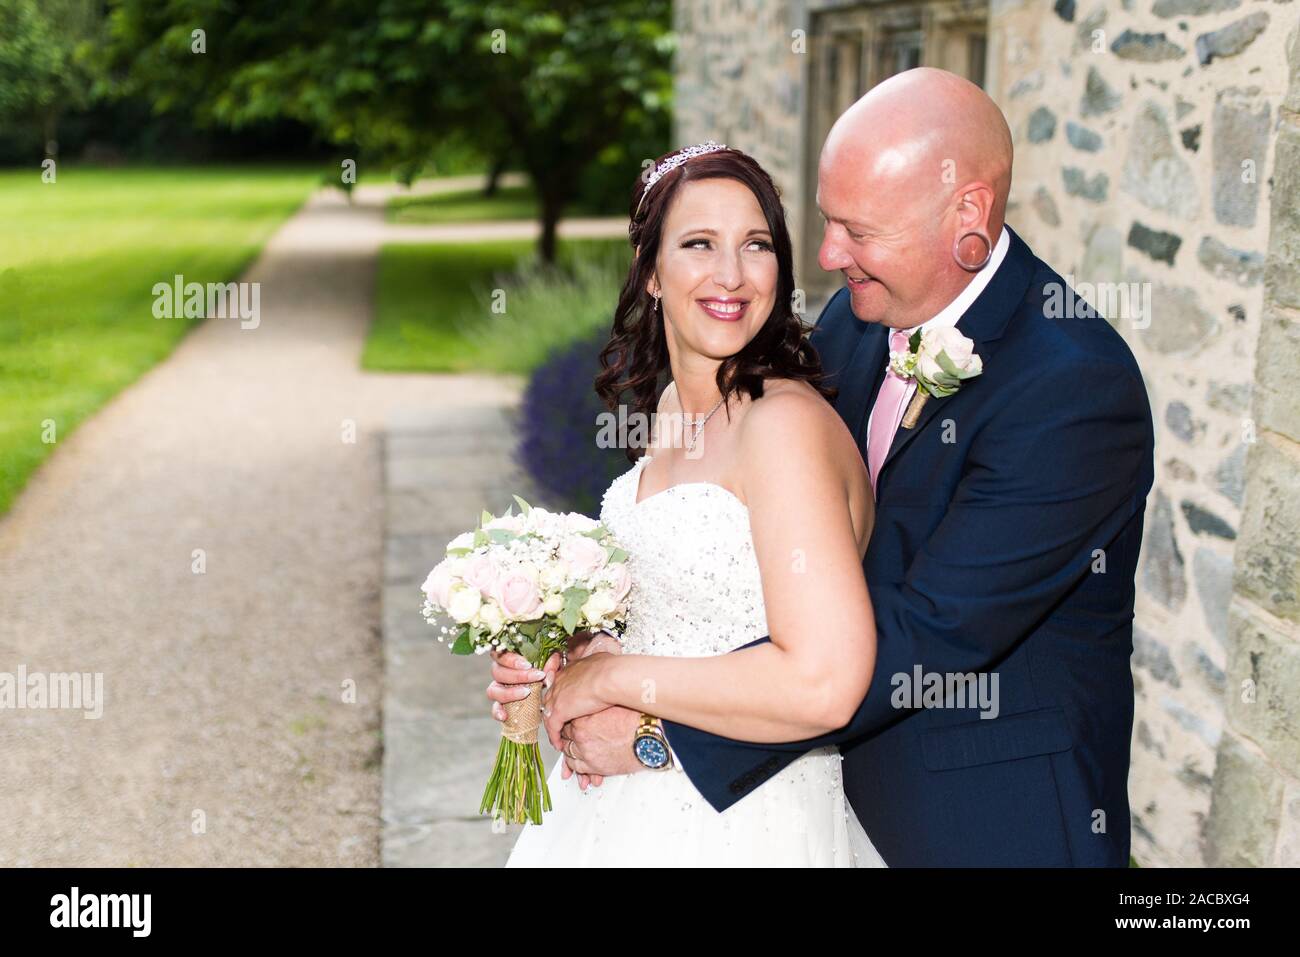 A bride and groom smiling, laughing together happy and in love on their wedding day, wedding photography Stock Photo